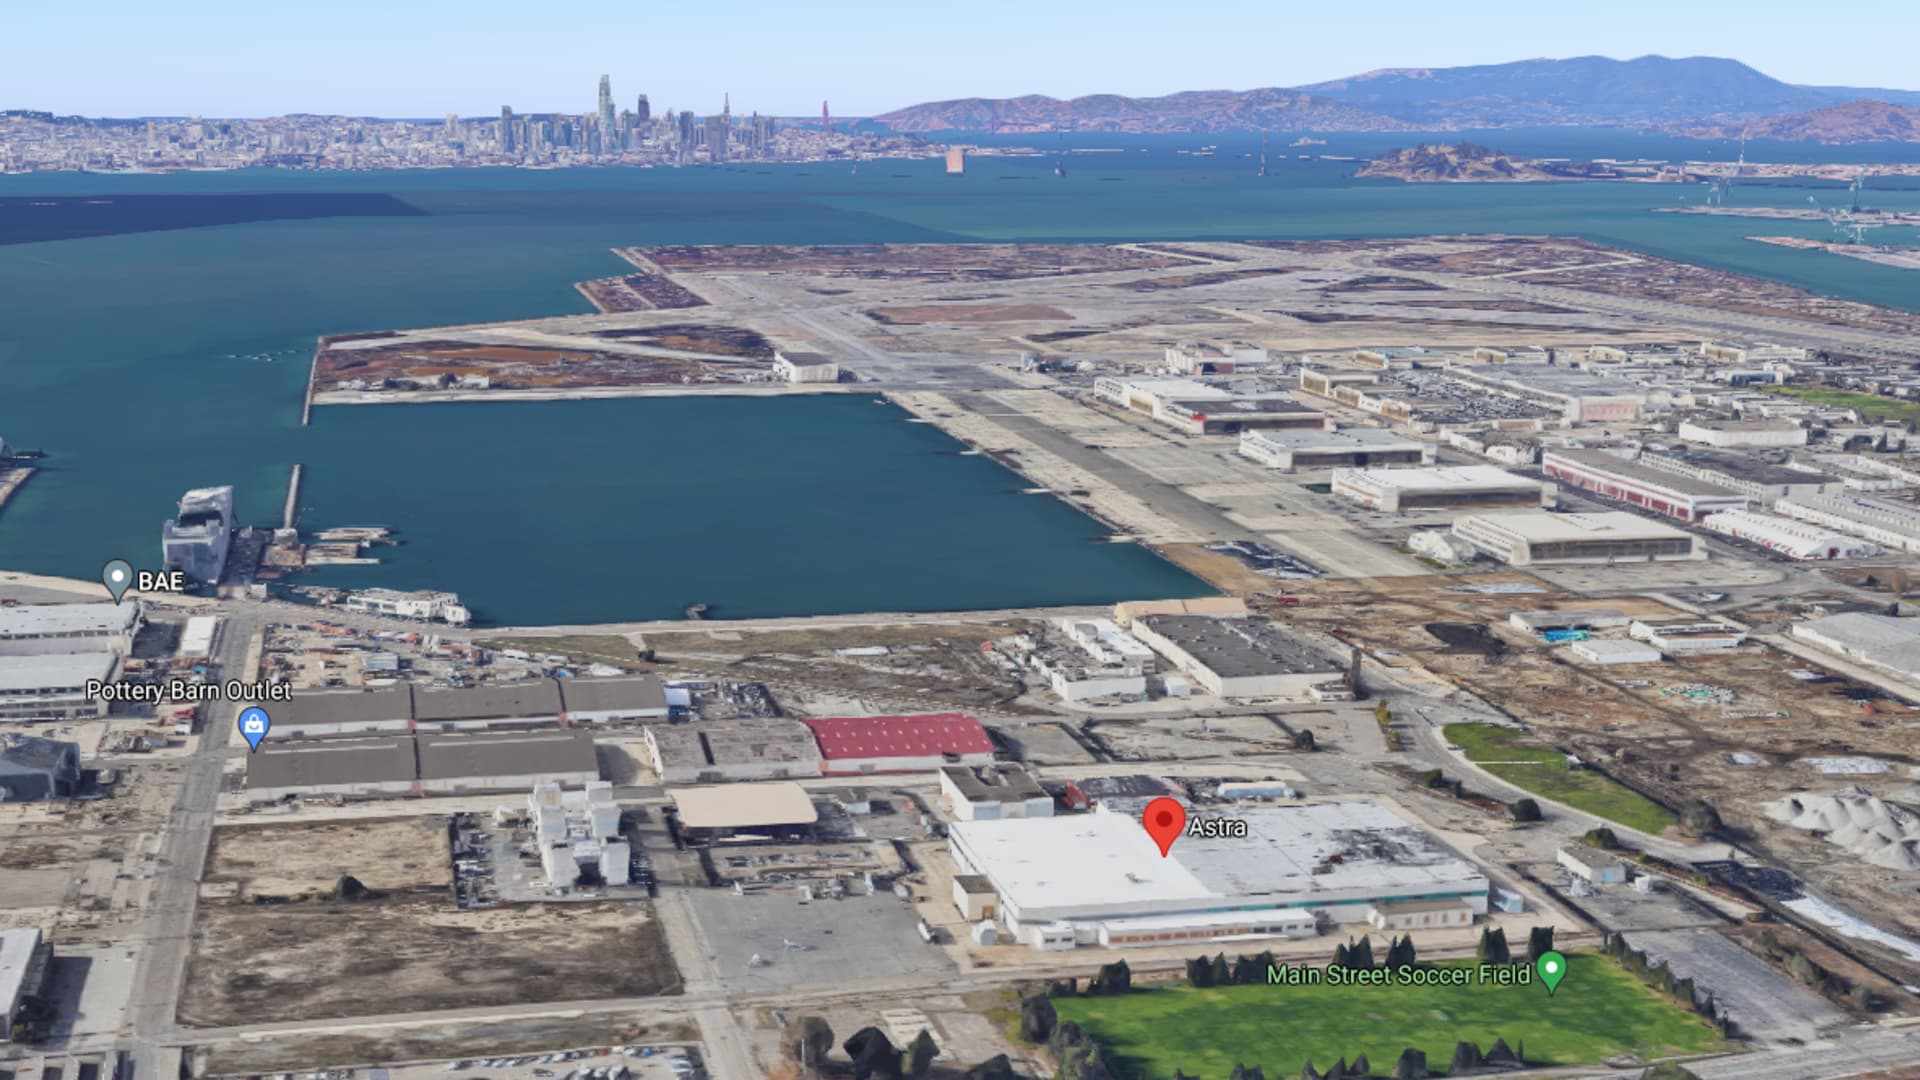 An overview of Astra headquarters' location on the San Francisco Bay in Alameda, California.